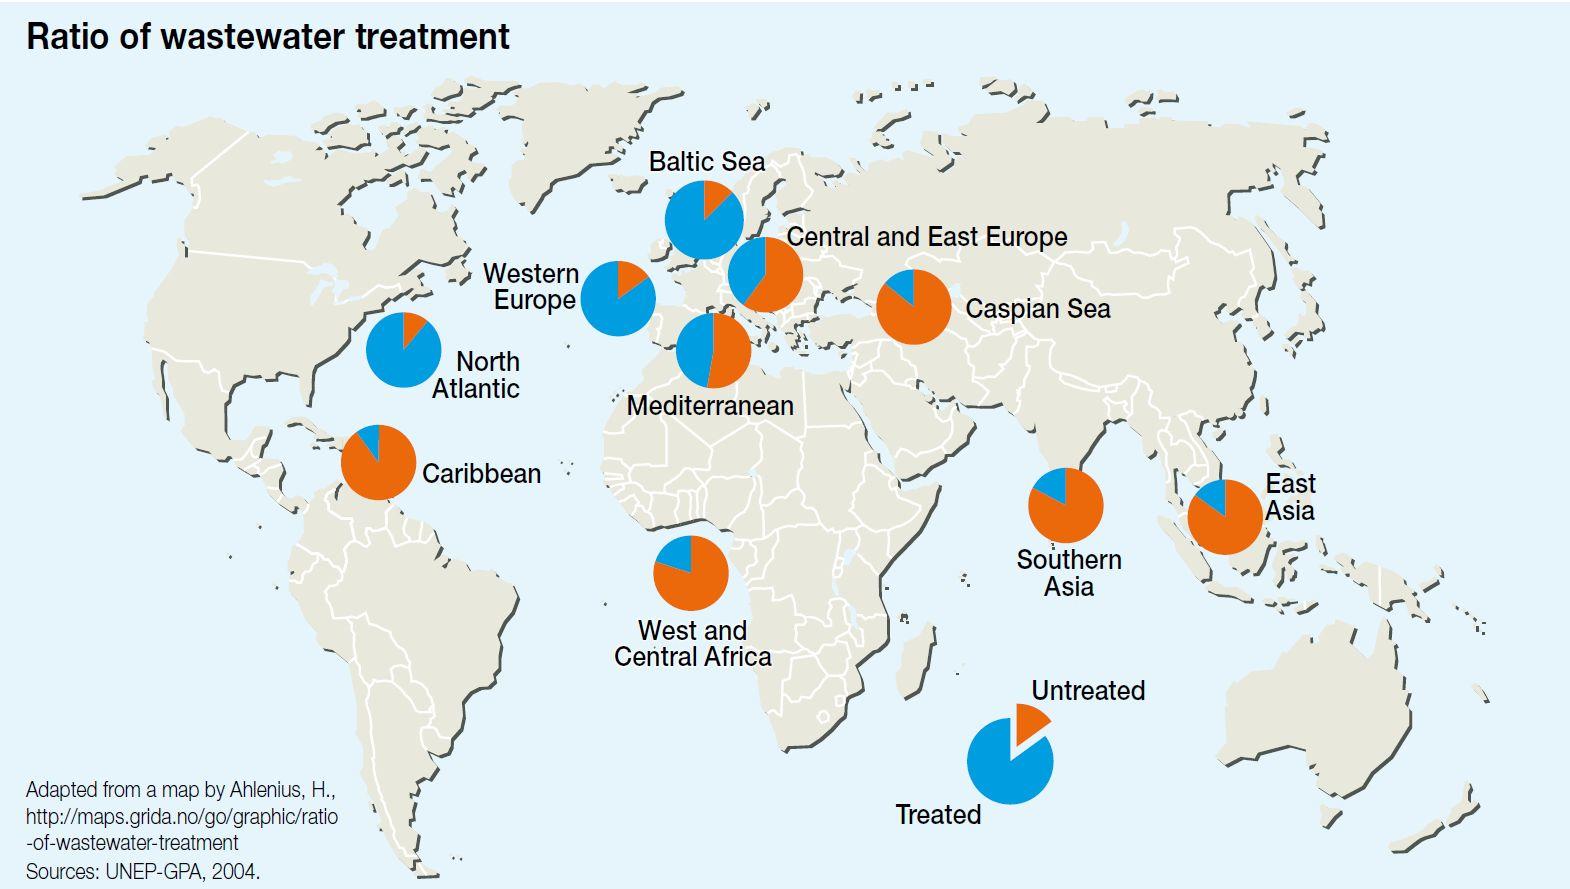 Ratio of wastewater treatment